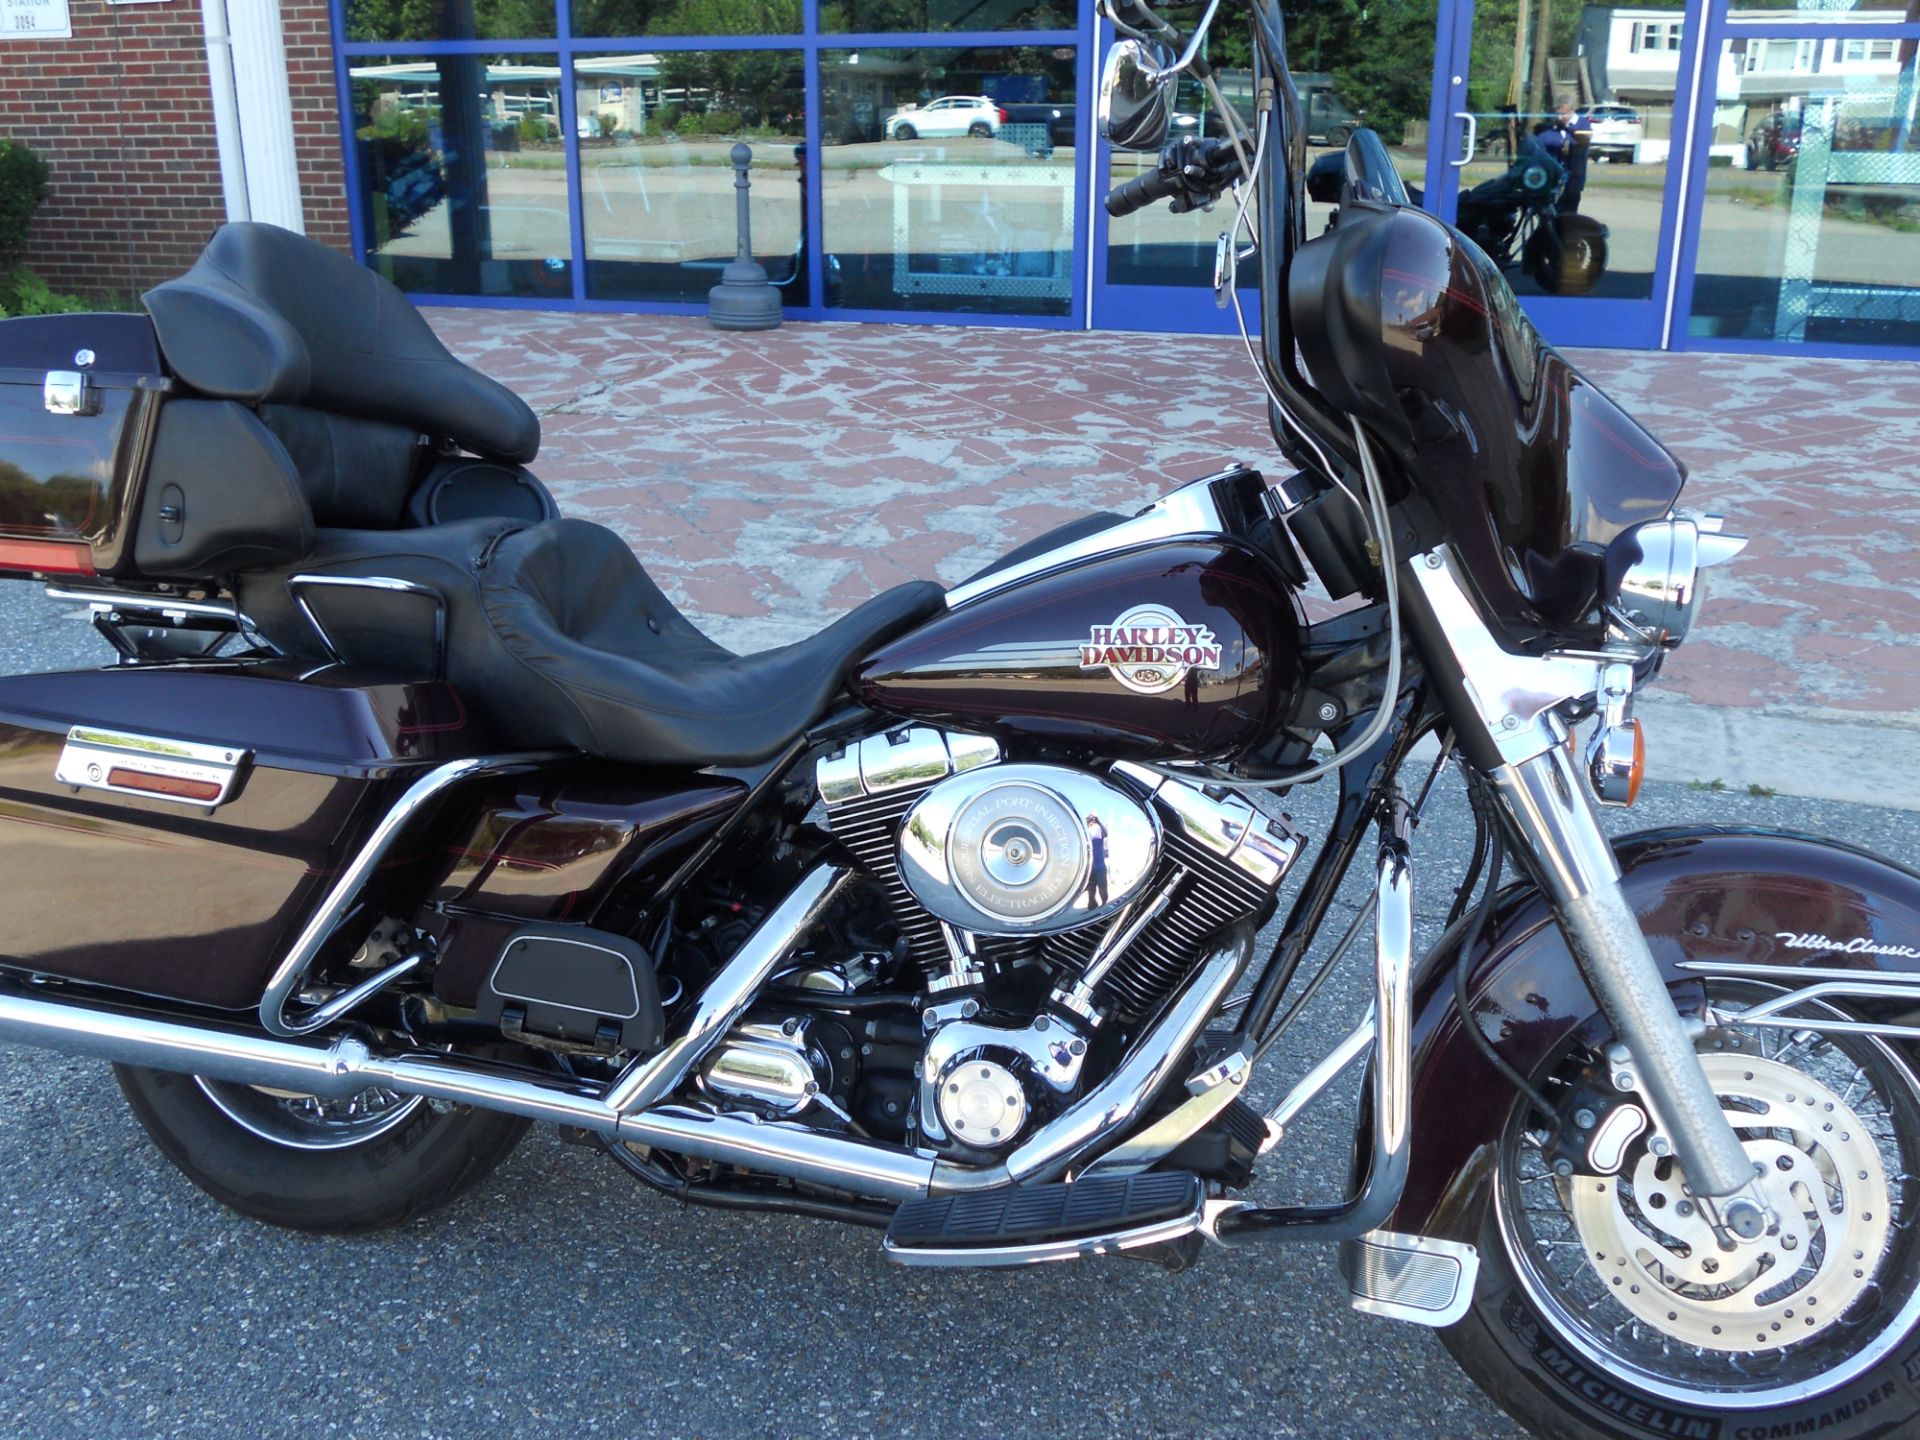 2005 Harley-Davidson FLHTCUI Ultra Classic® Electra Glide® in Derry, New Hampshire - Photo 1